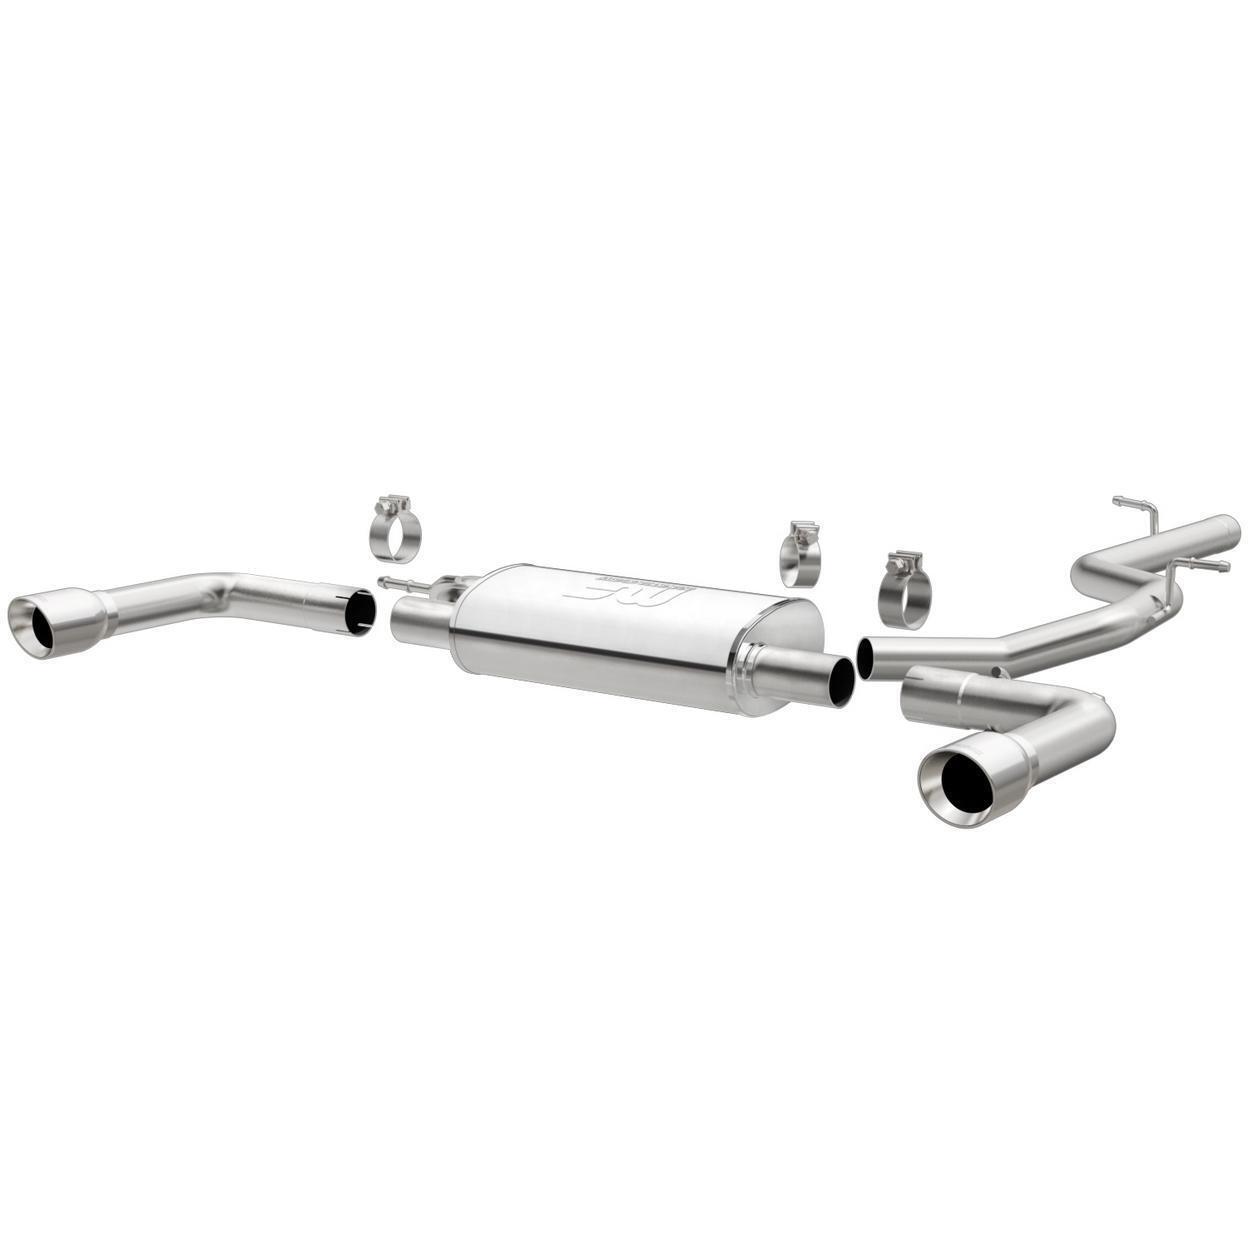 Exhaust System Kit for 2019-2020 Audi A3 Quattro